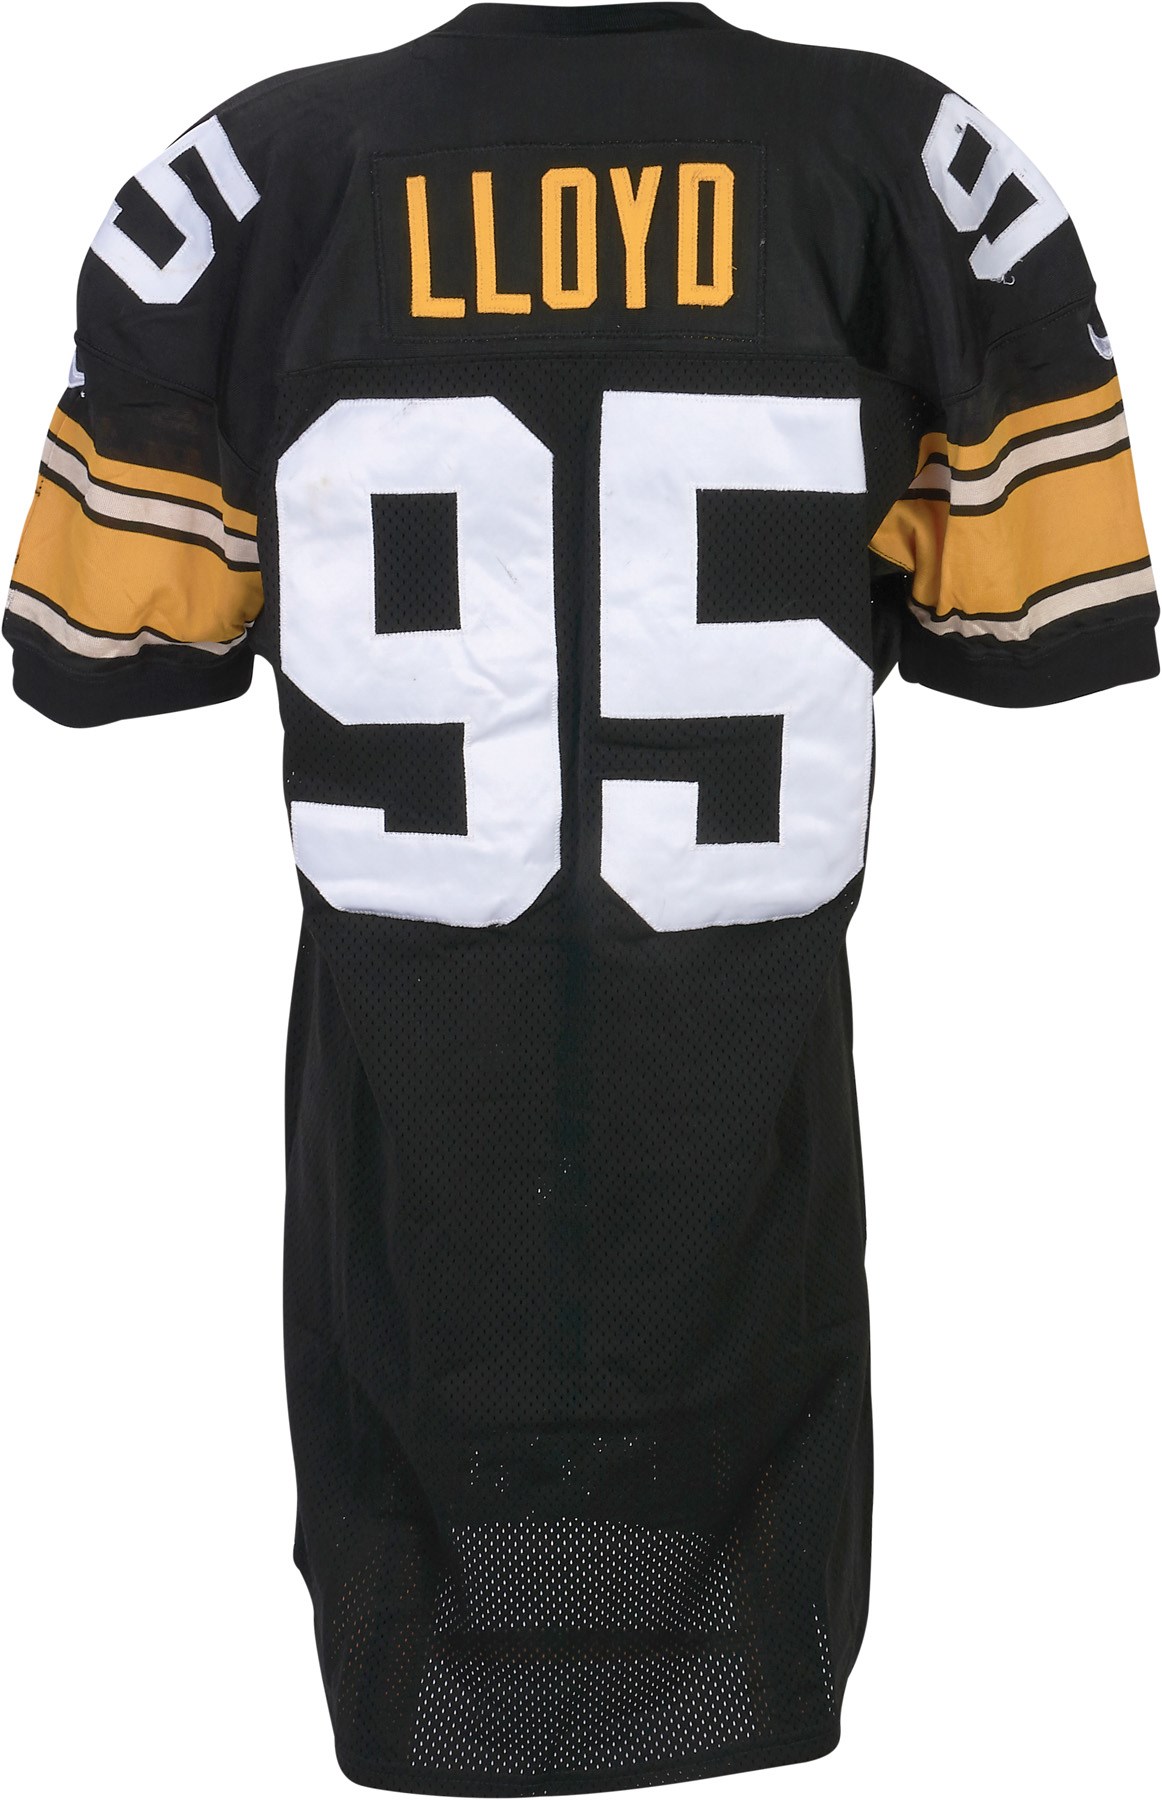 - 1996 Greg Lloyd Pittsburgh Steelers Game Worn Jersey (Photo-Matched)